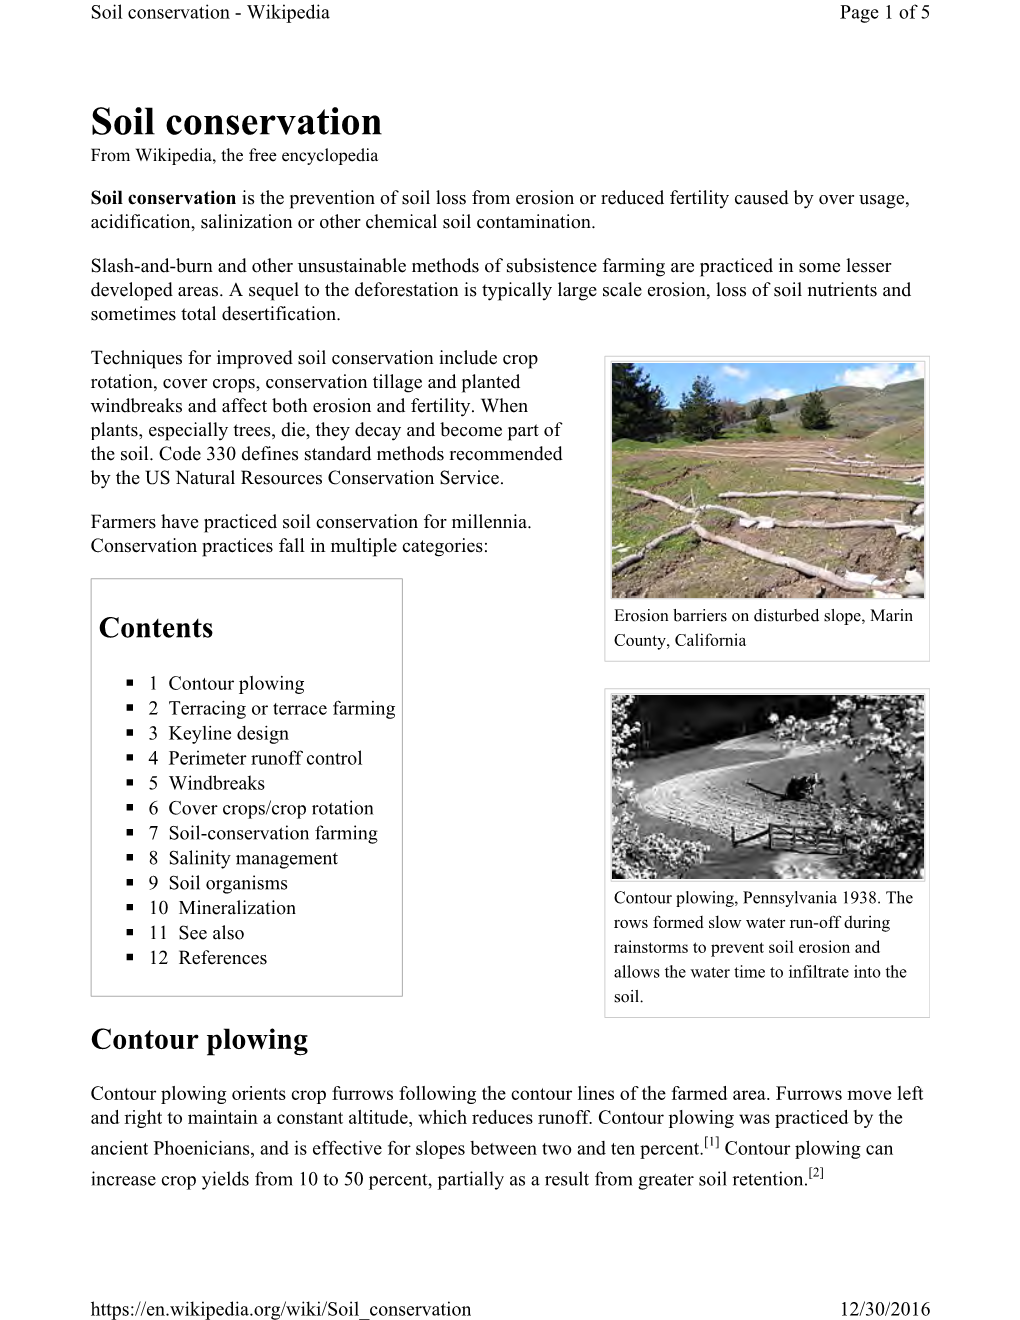 Soil Conservation - Wikipedia Page 1 of 5